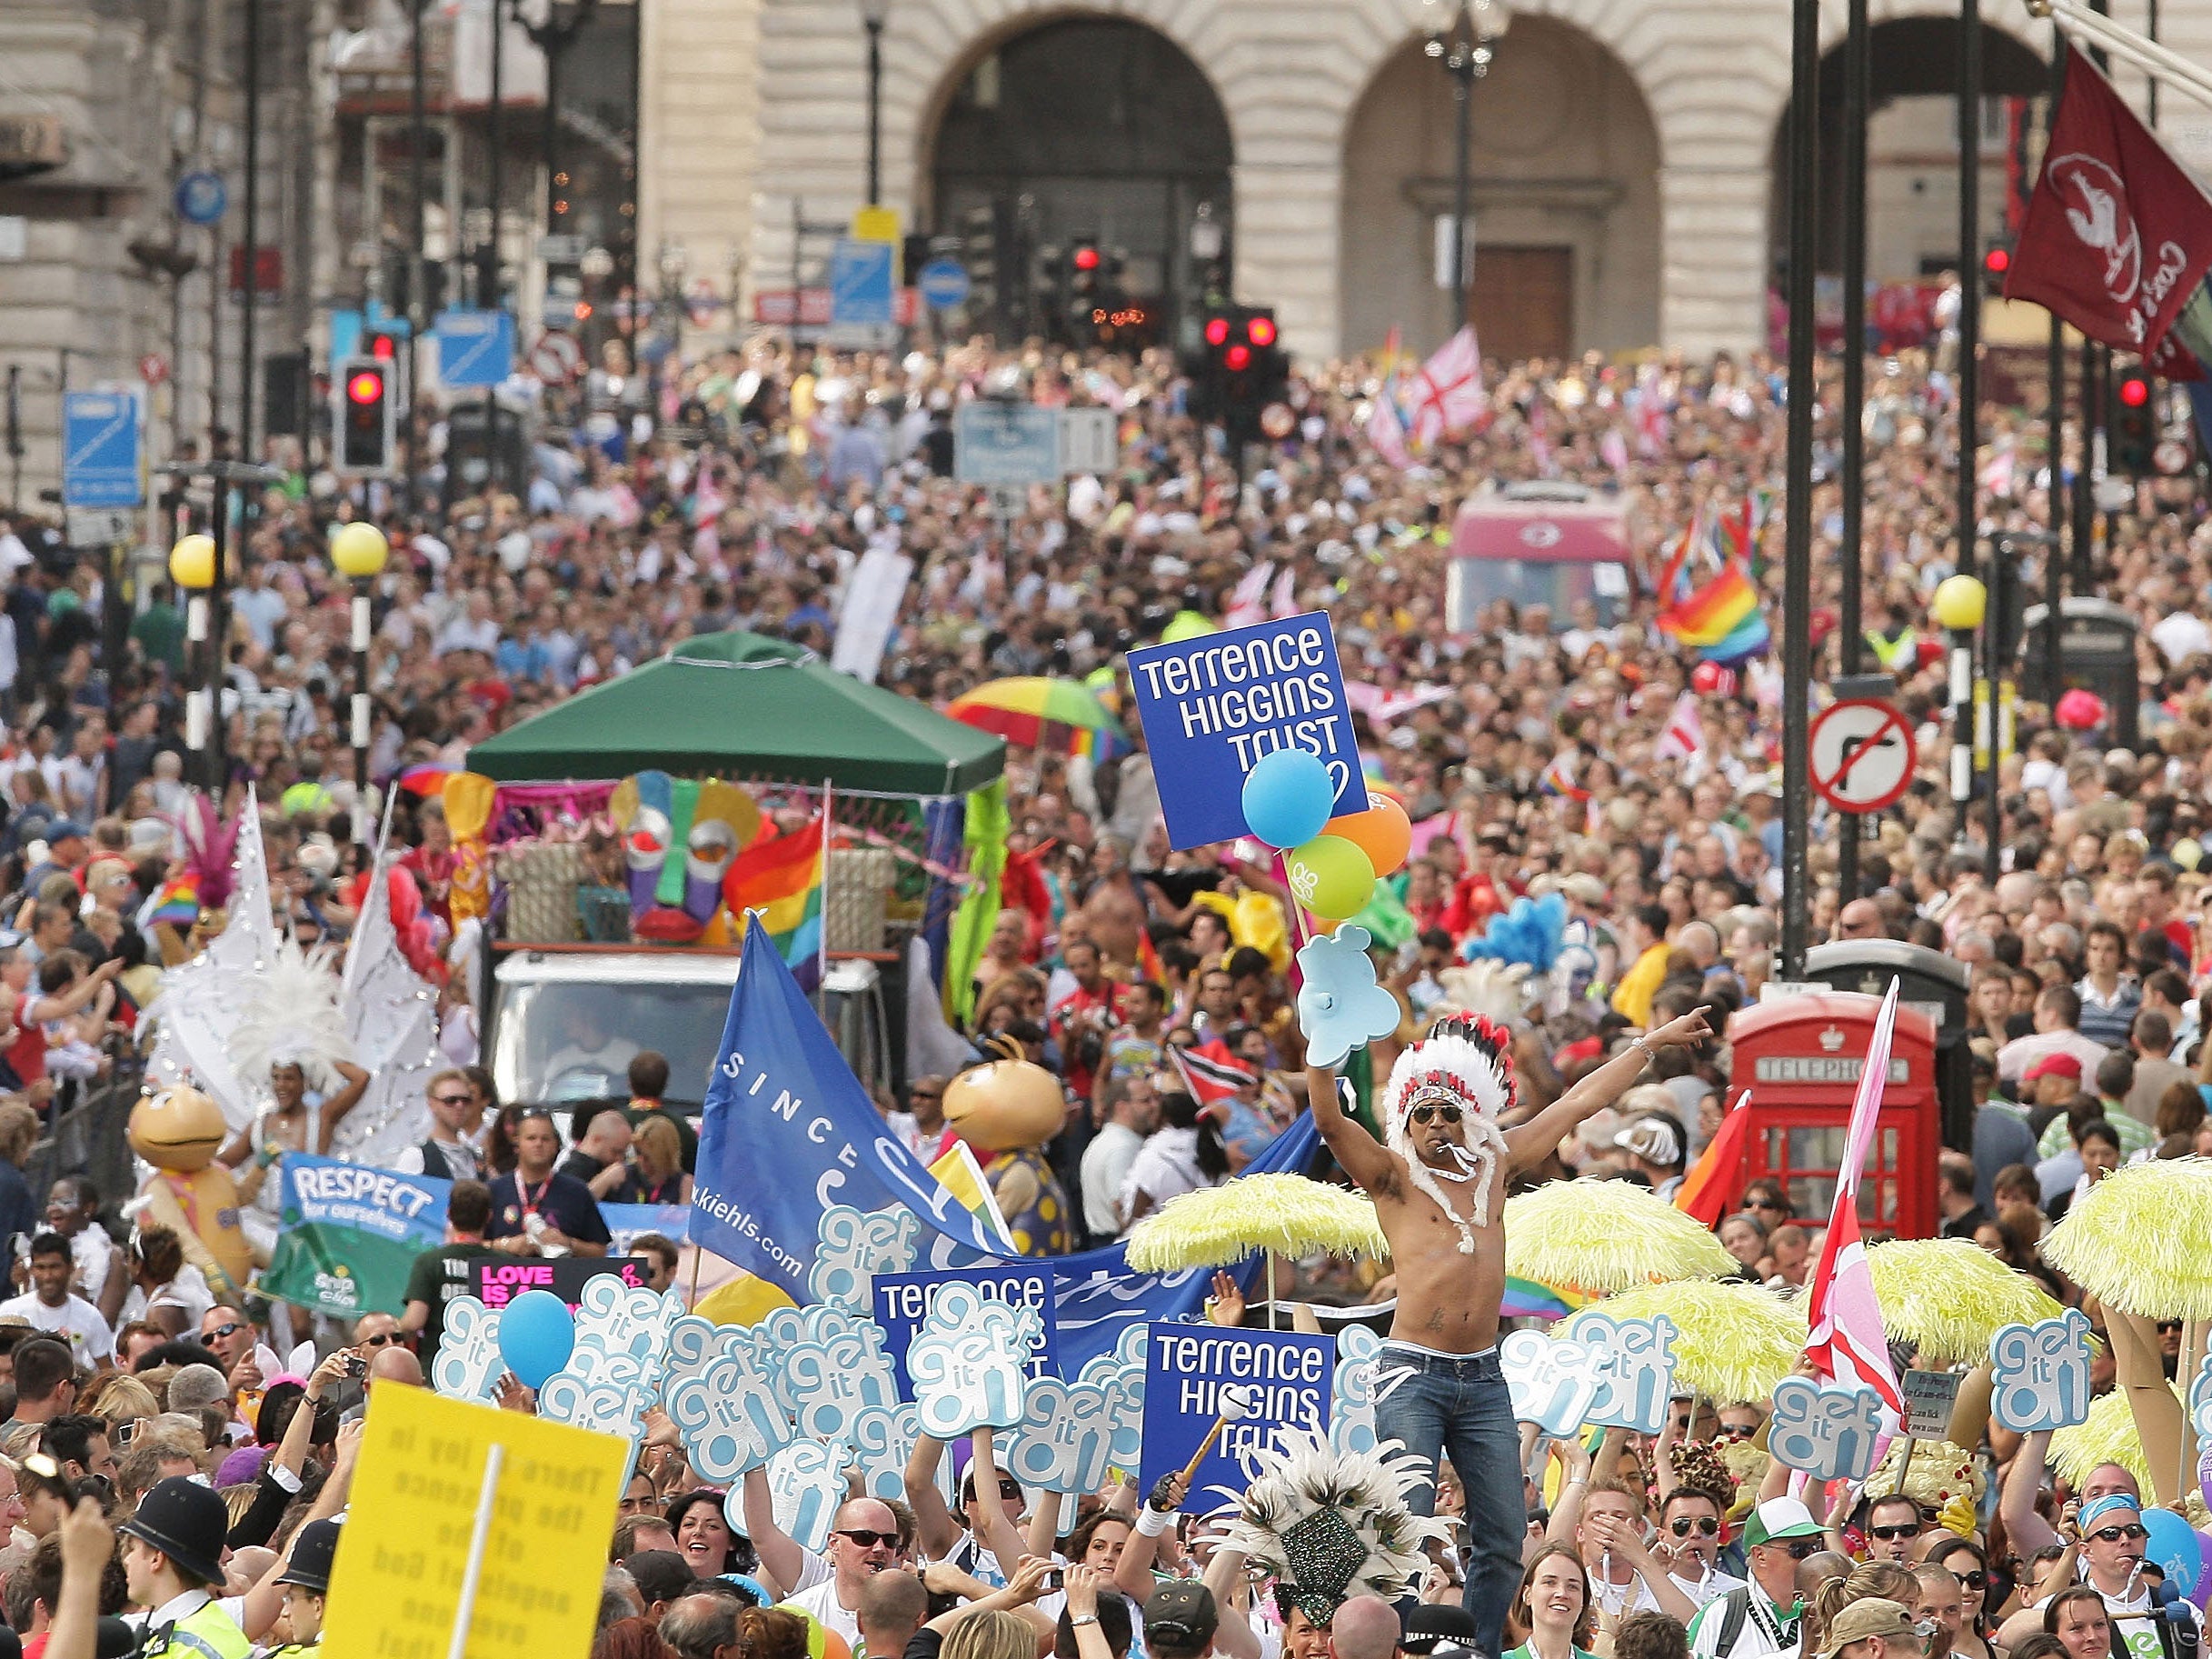 Ukip was refused permission to join the Pride in London parade for 2015